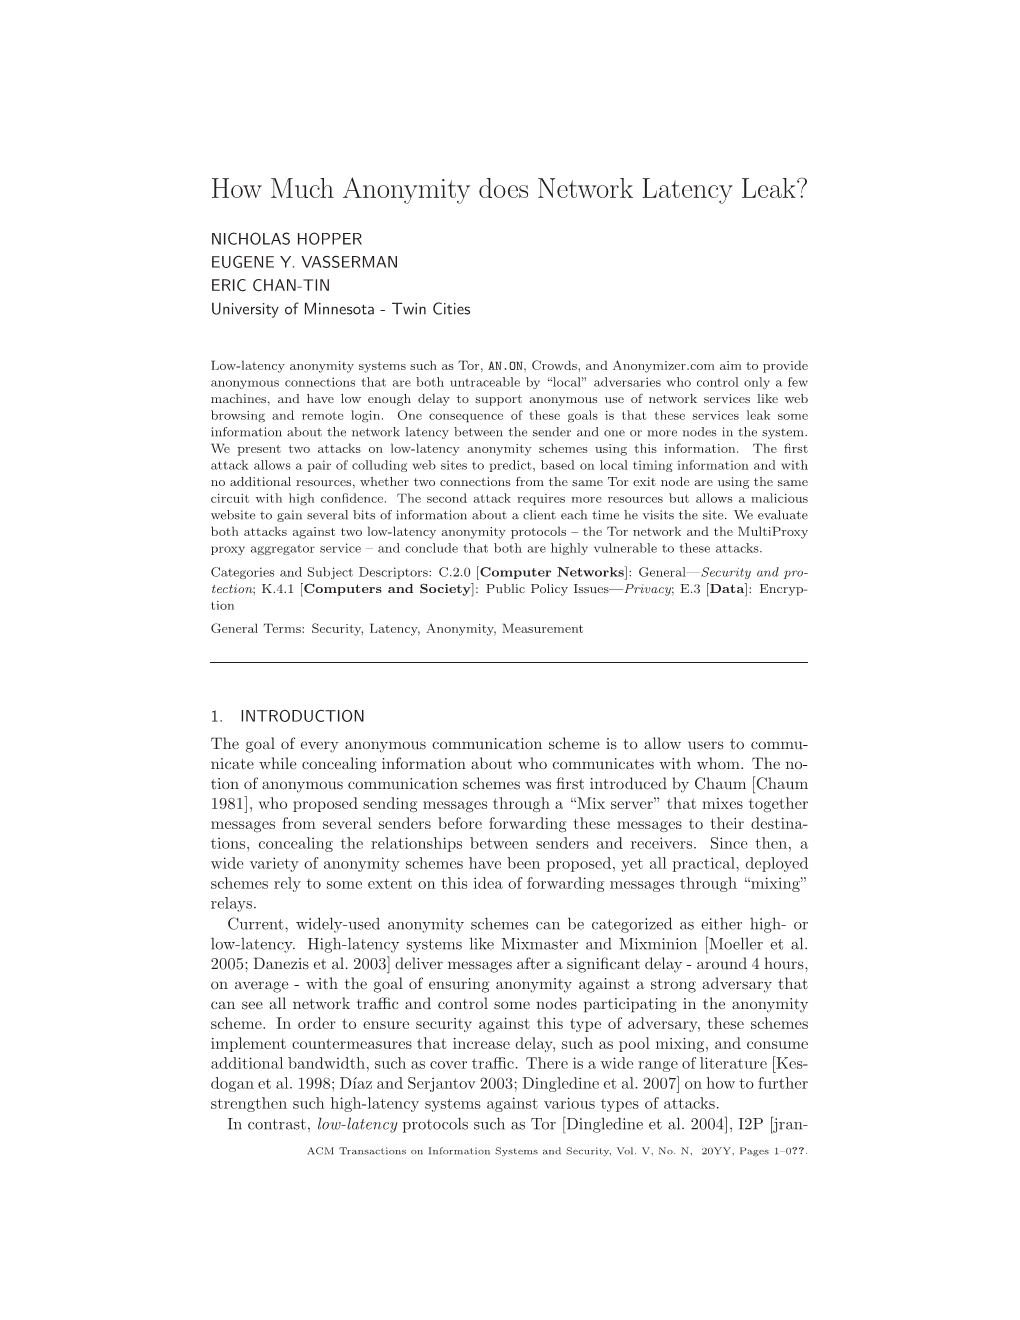 How Much Anonymity Does Network Latency Leak?